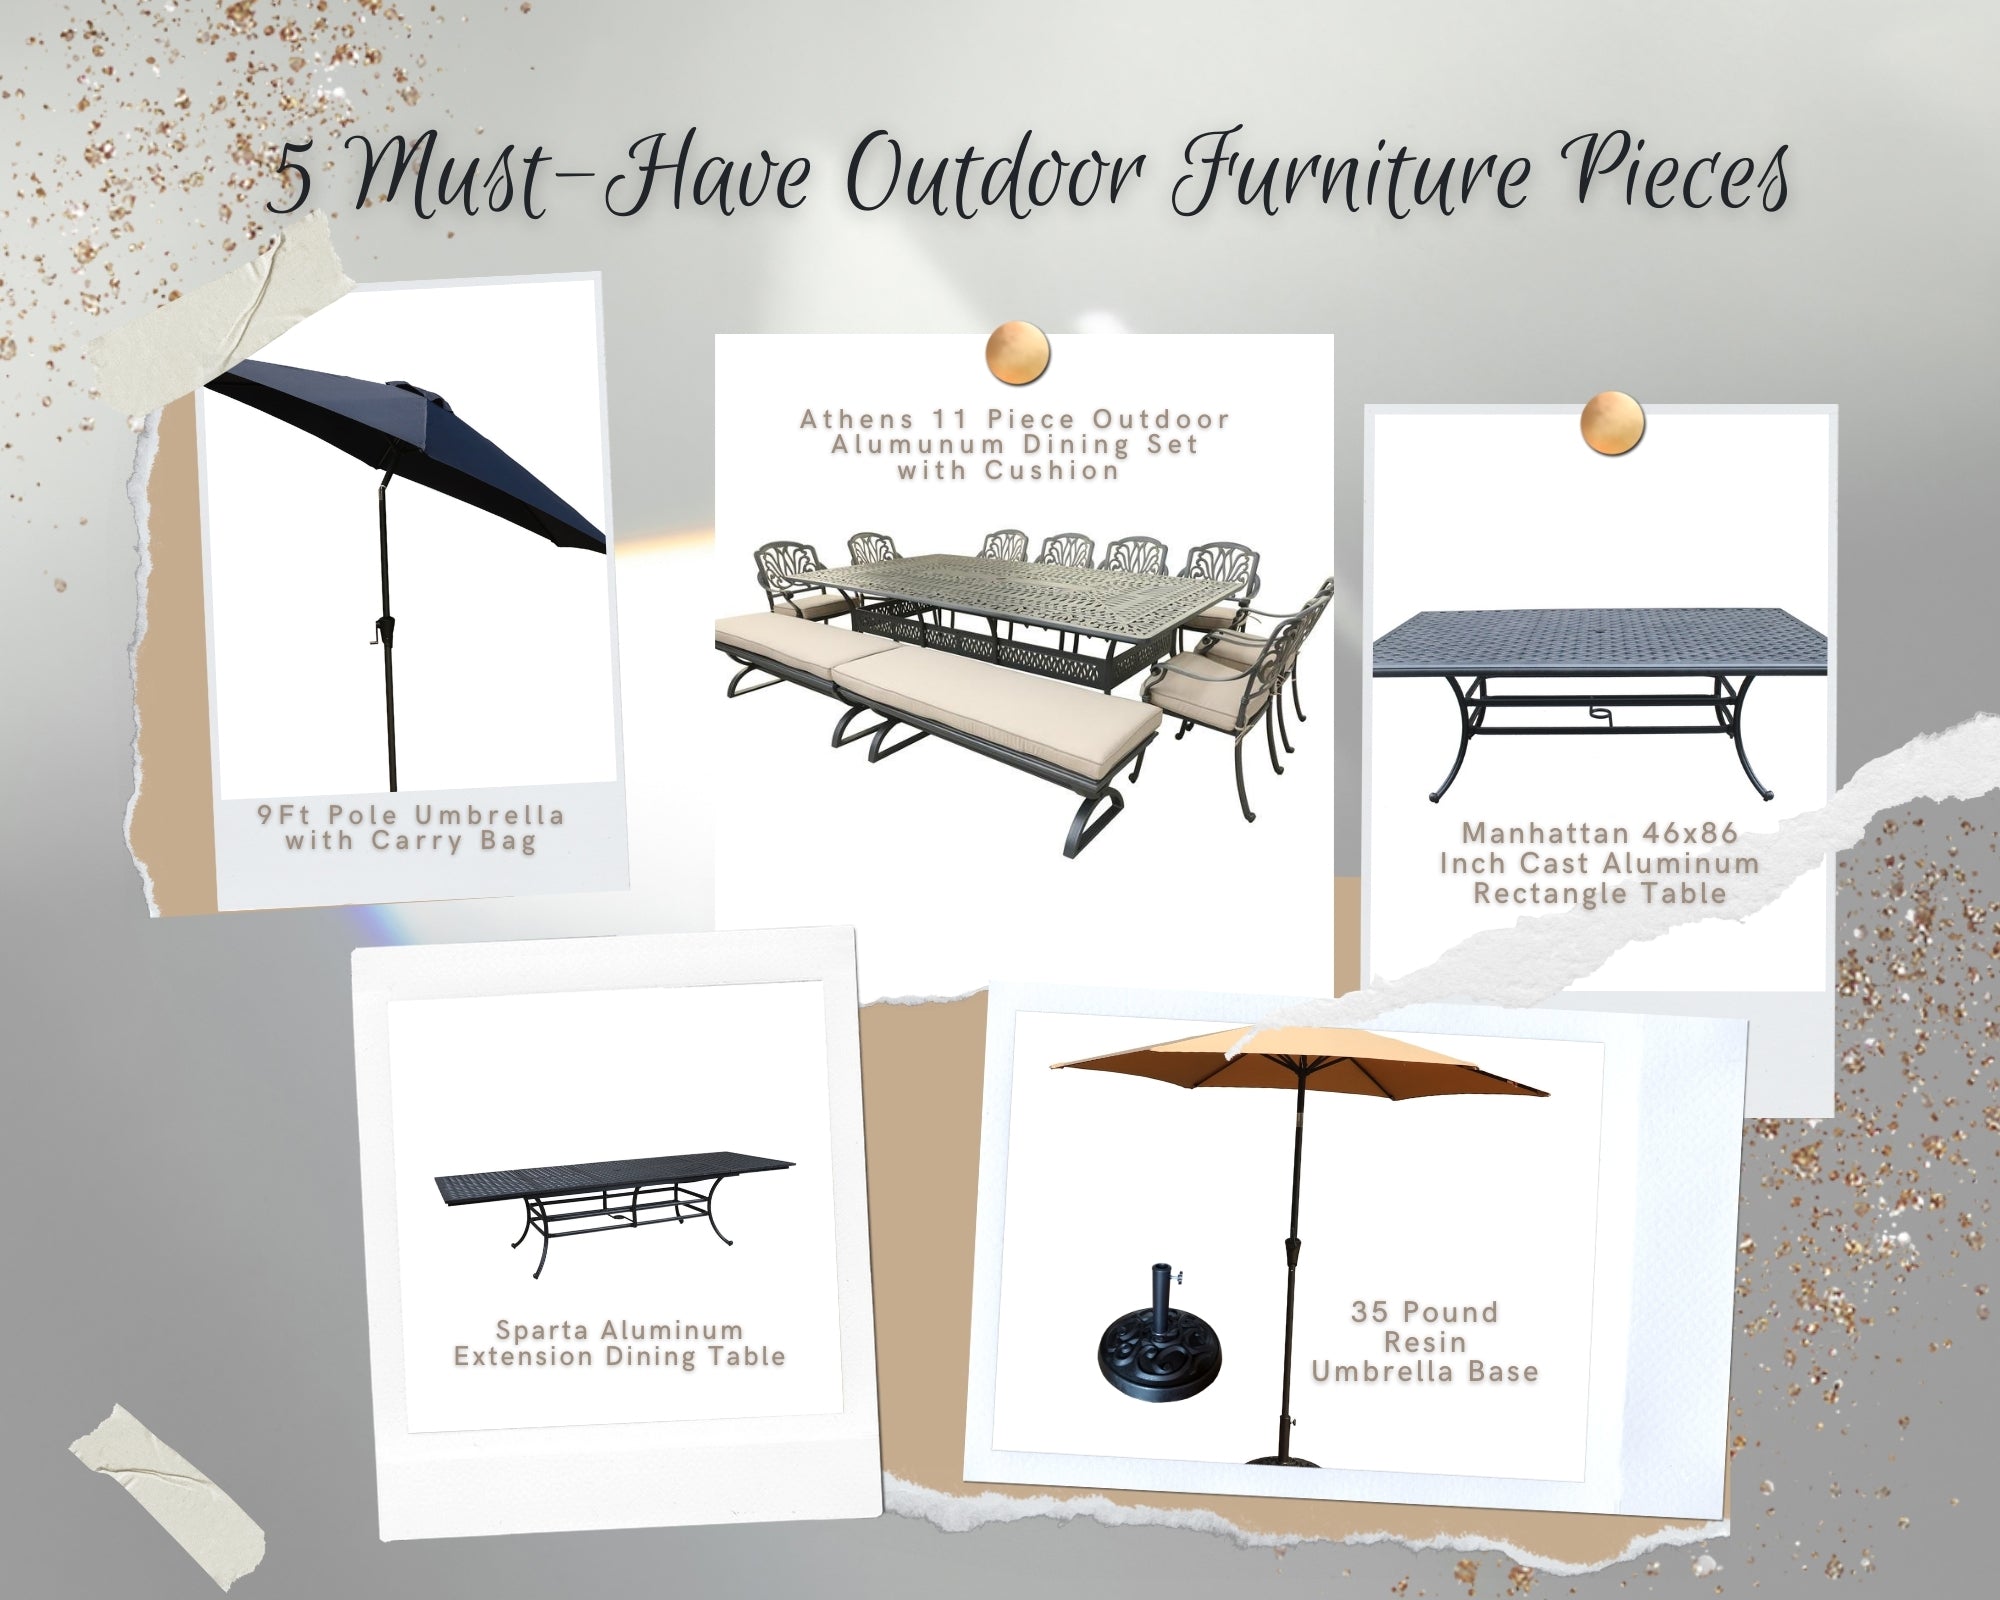 5 MUST HAVE OUTDOOR FURNITURE PIECES